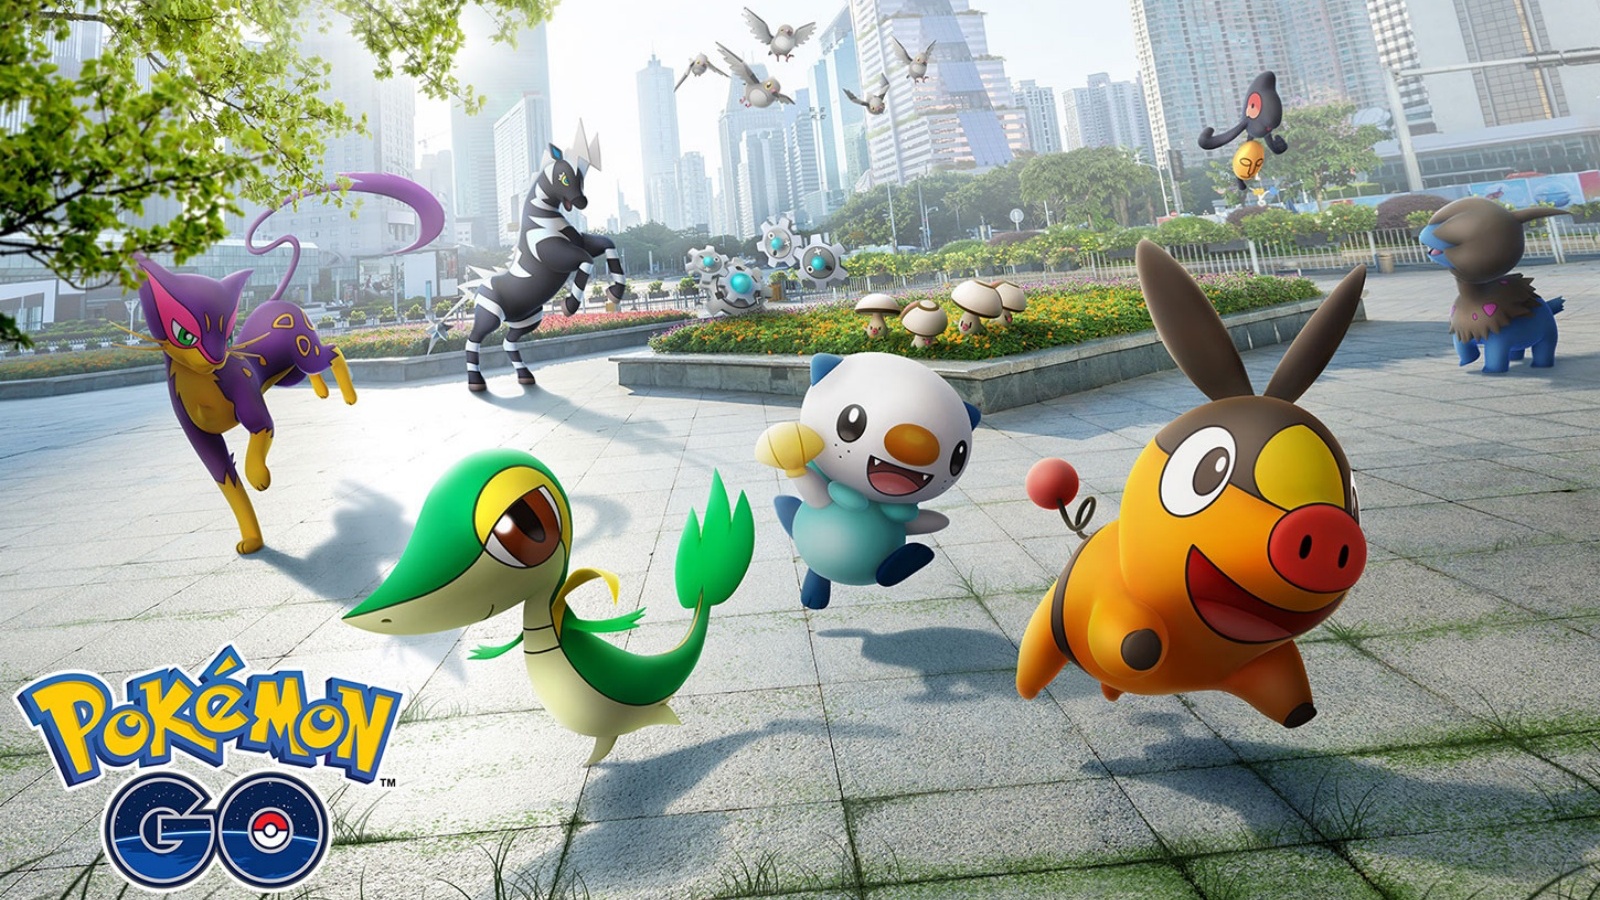 Pokemon Go players criticize lack of incentive to go out and play – Dexerto